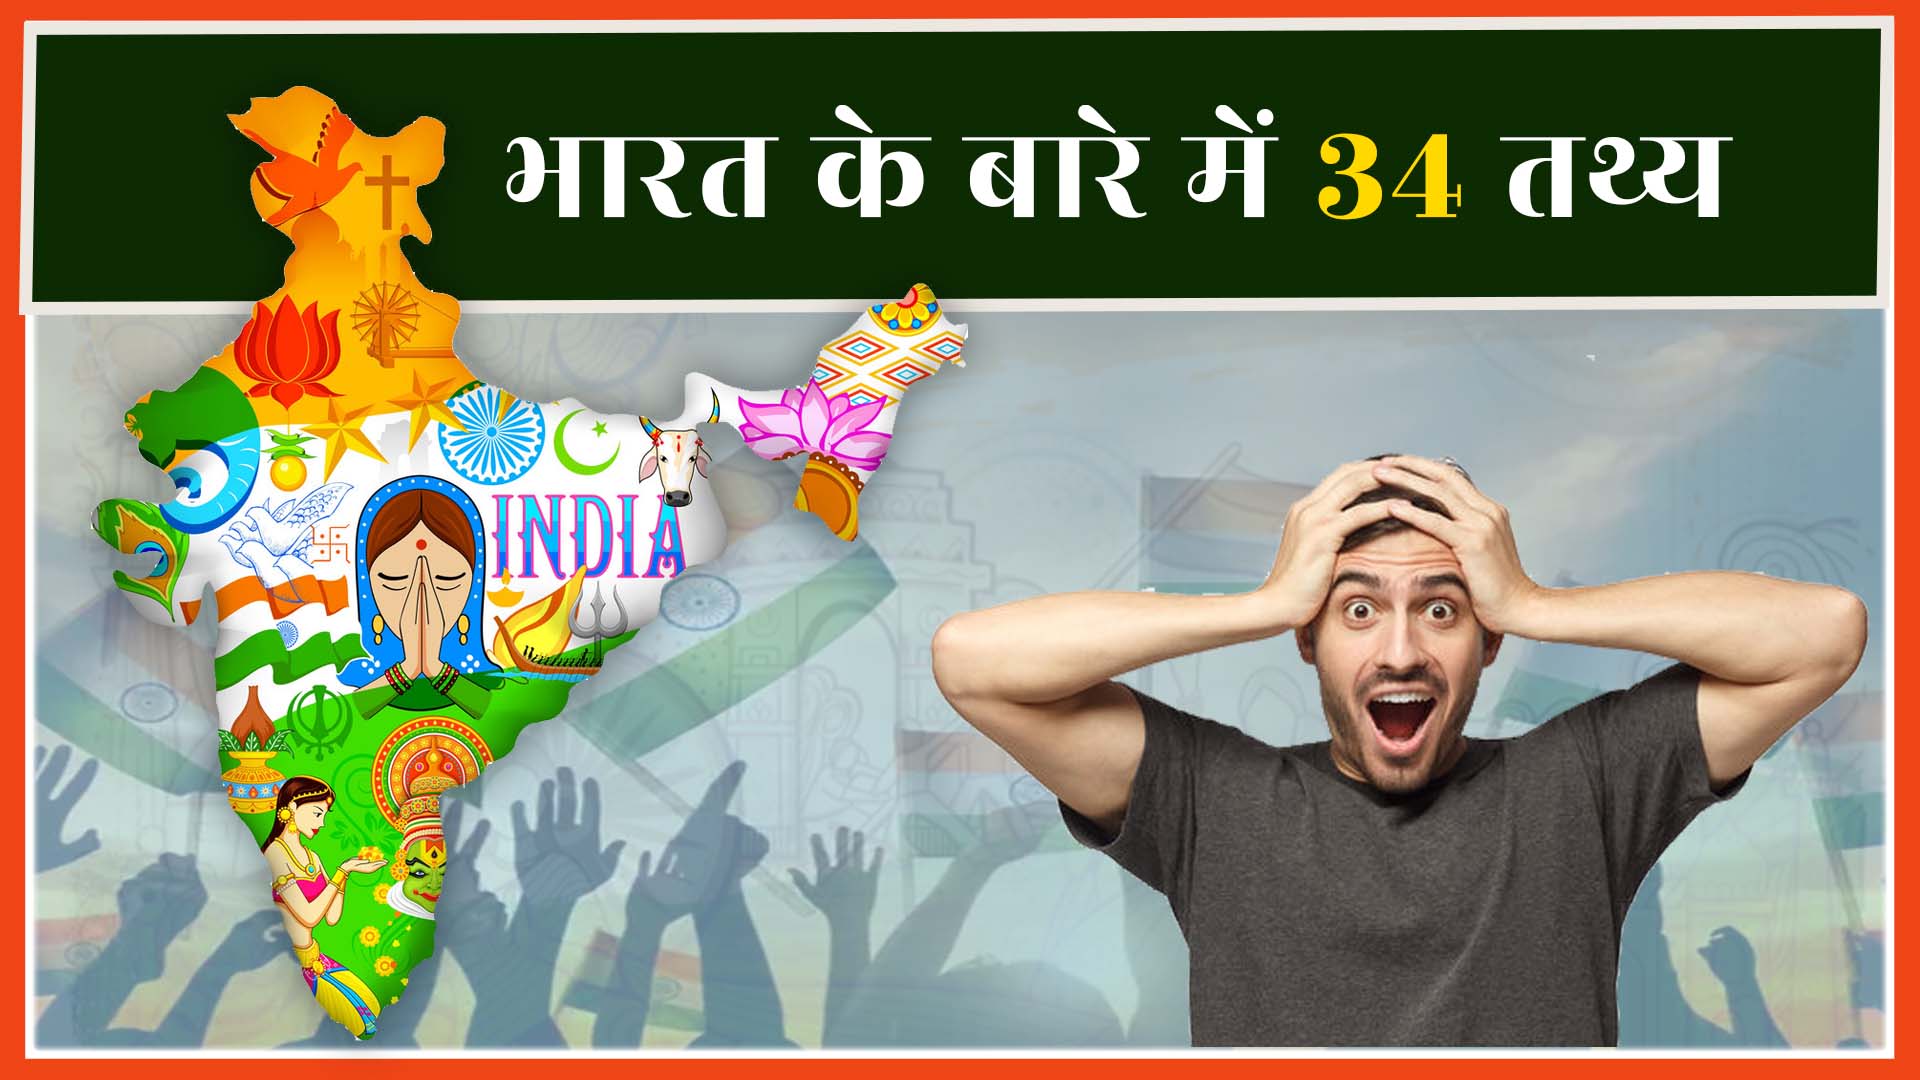 Amazing Facts About India